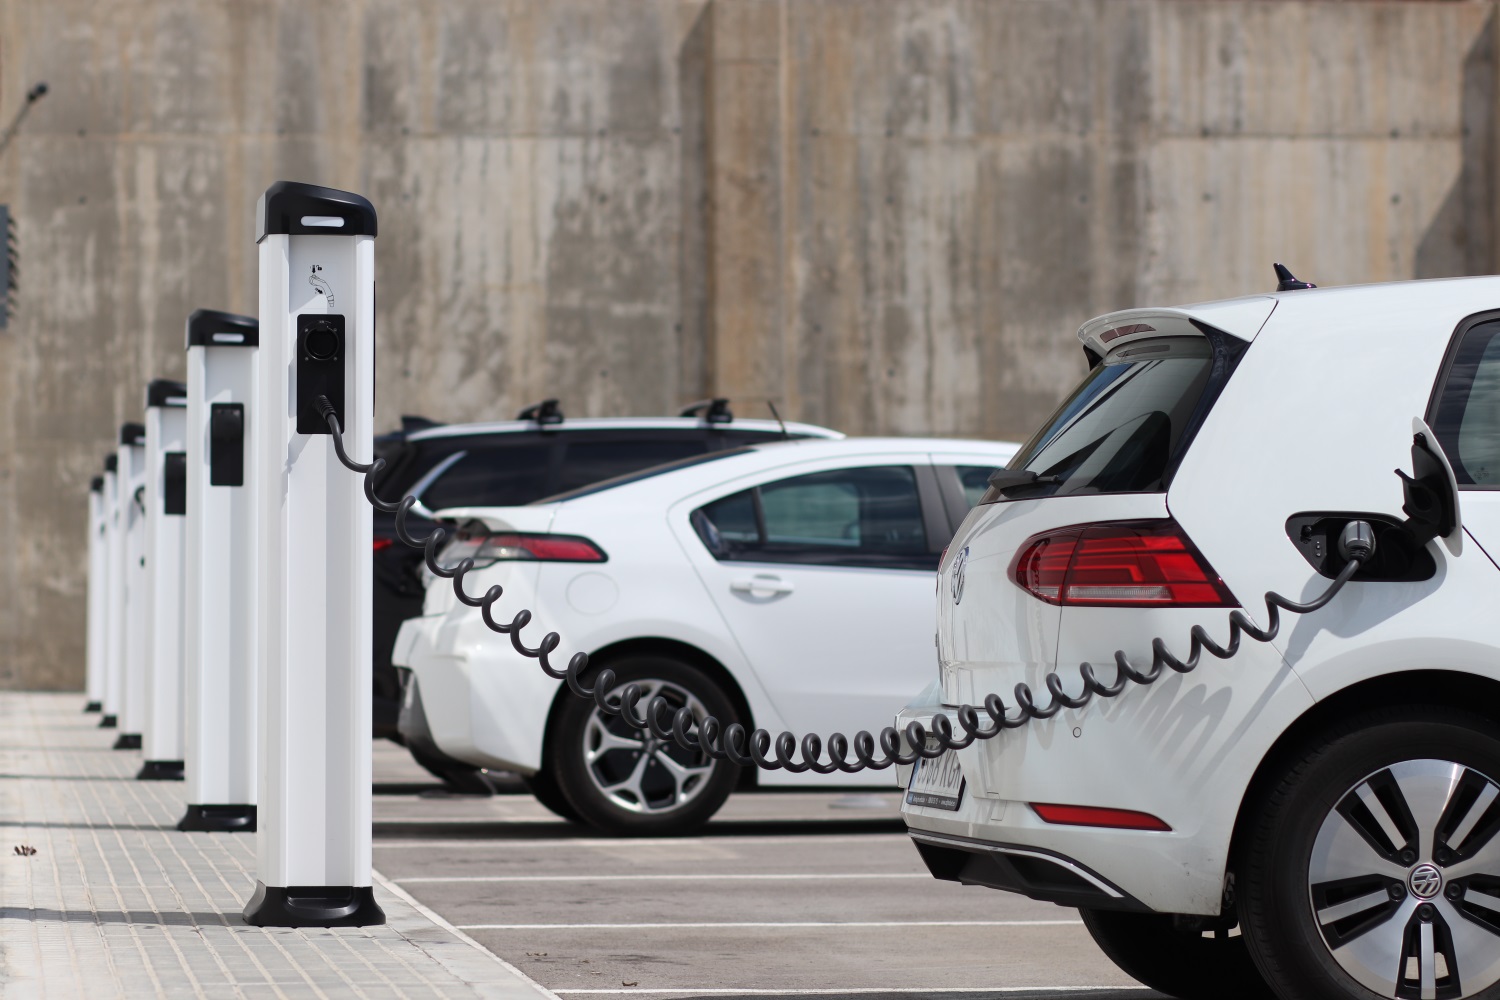 The arrival of this new system “democratizes” the quick EV charging for most of the population, making it more accessible and easier to manage